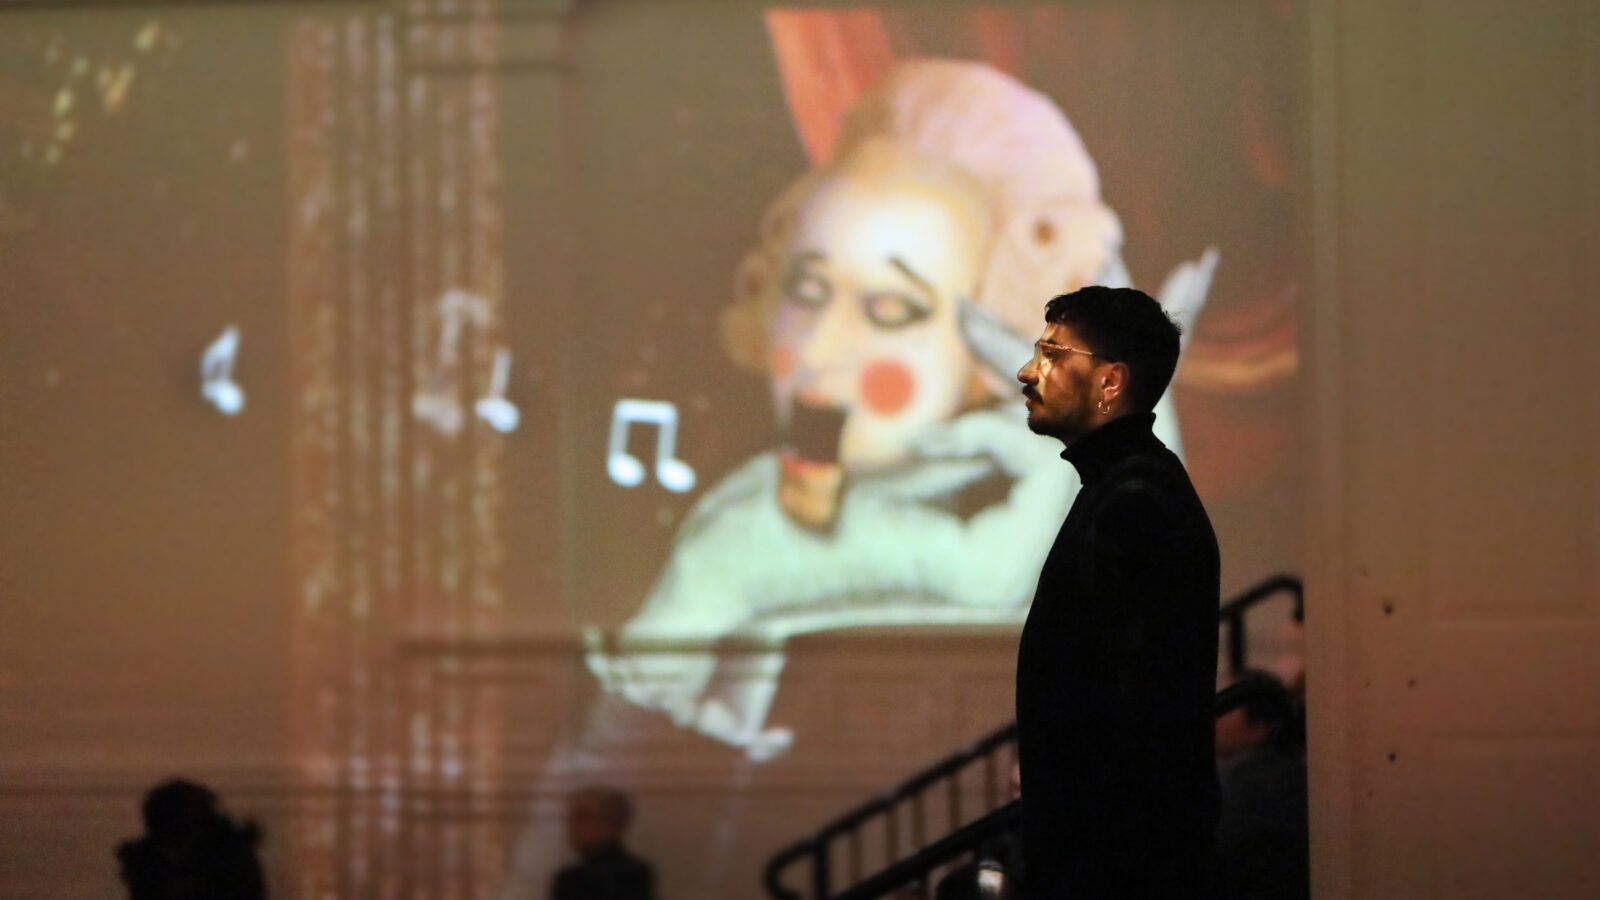 an audience member surveys the Immersive Mozart exhibition, with a frame visible in the background